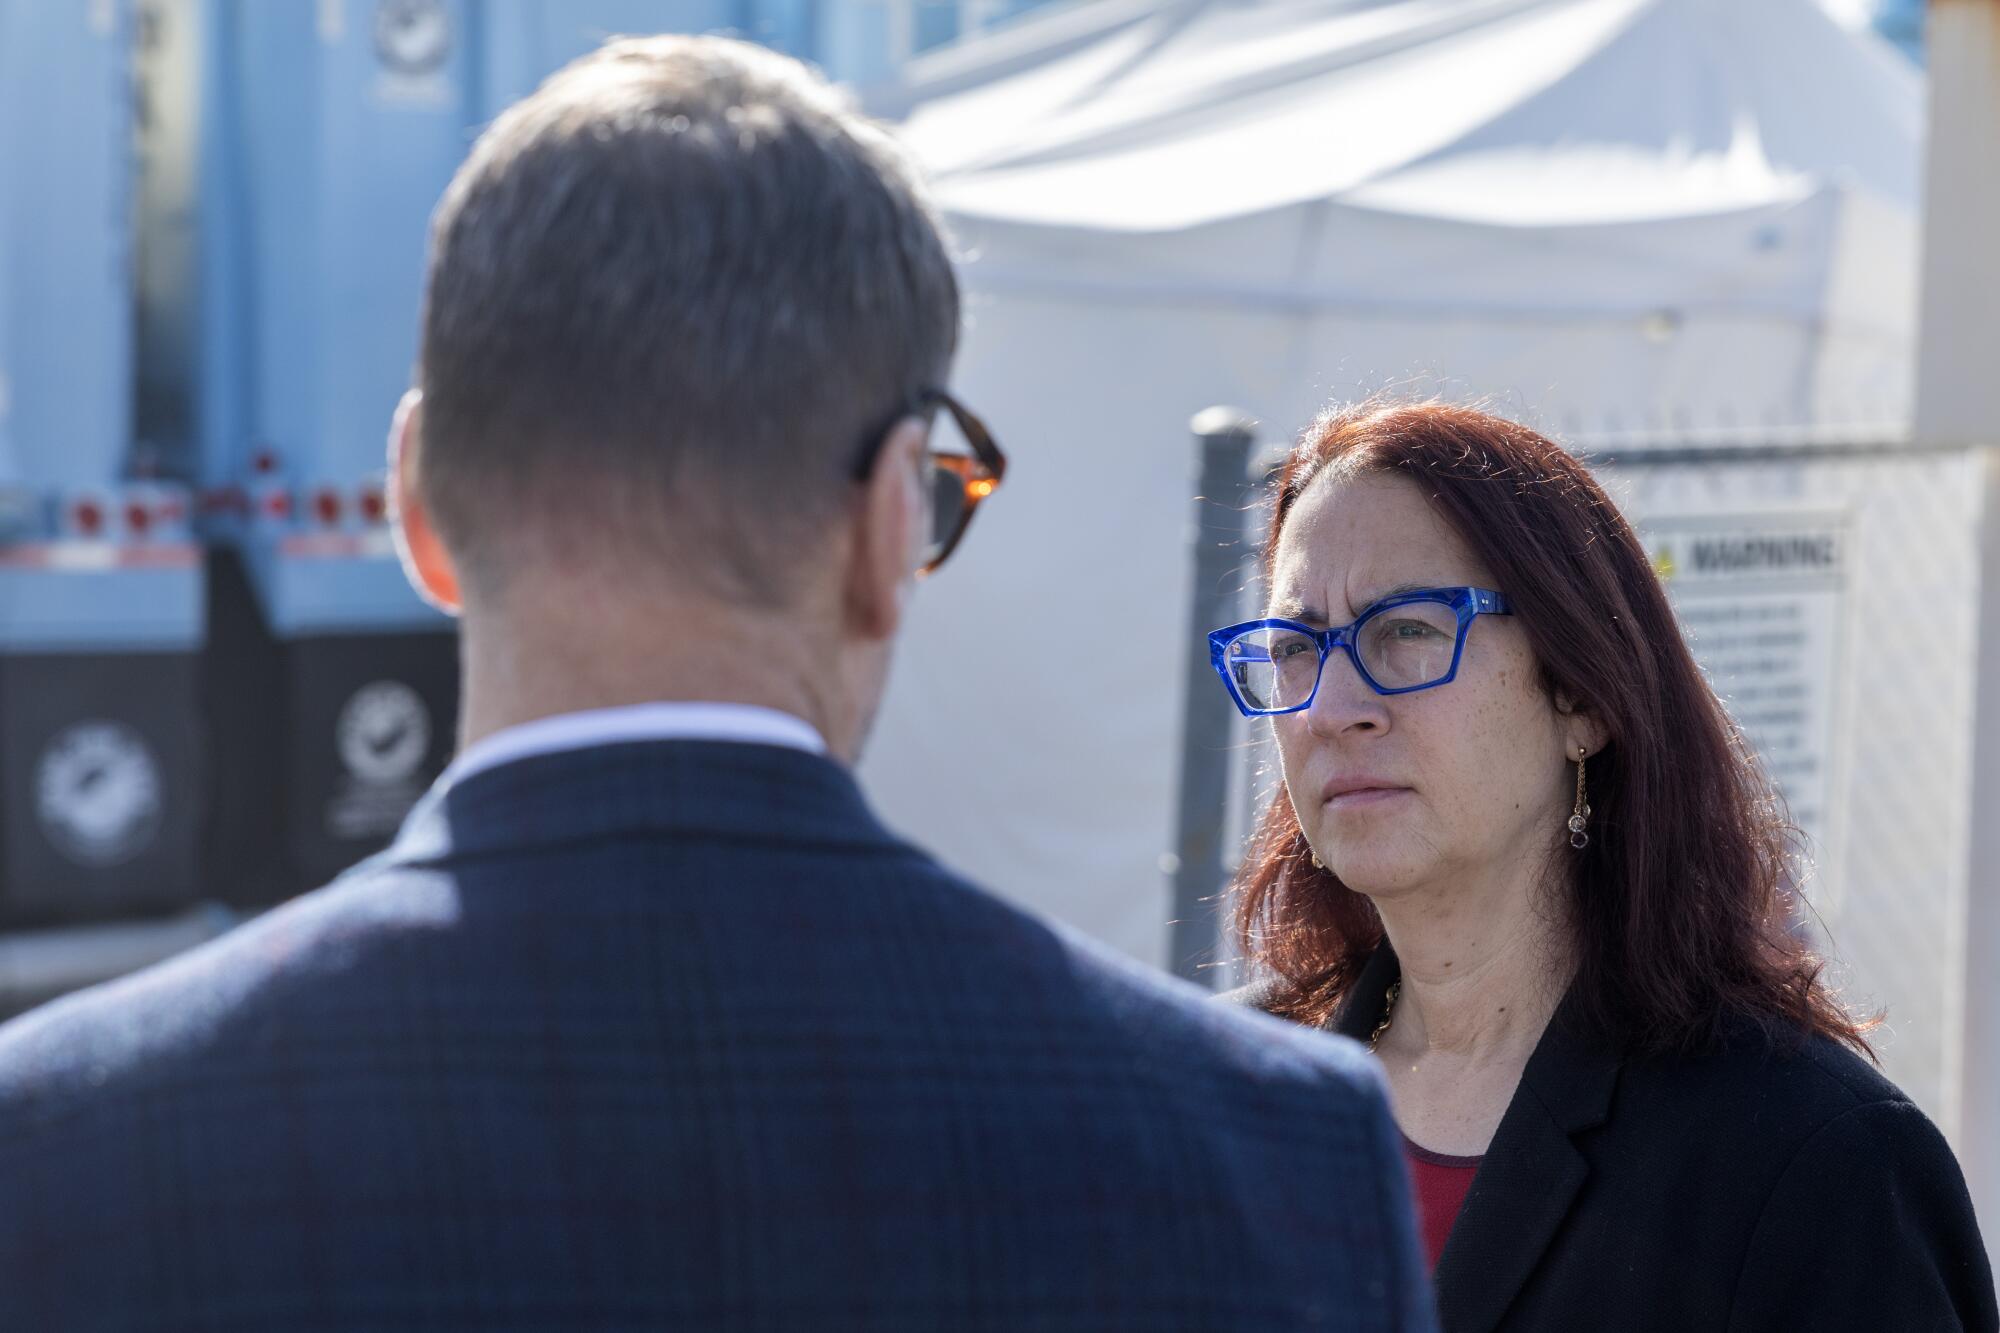 Assemblymember Laura Friedman, wearing blue glasses and speaking to a man who is turned away from the camera.